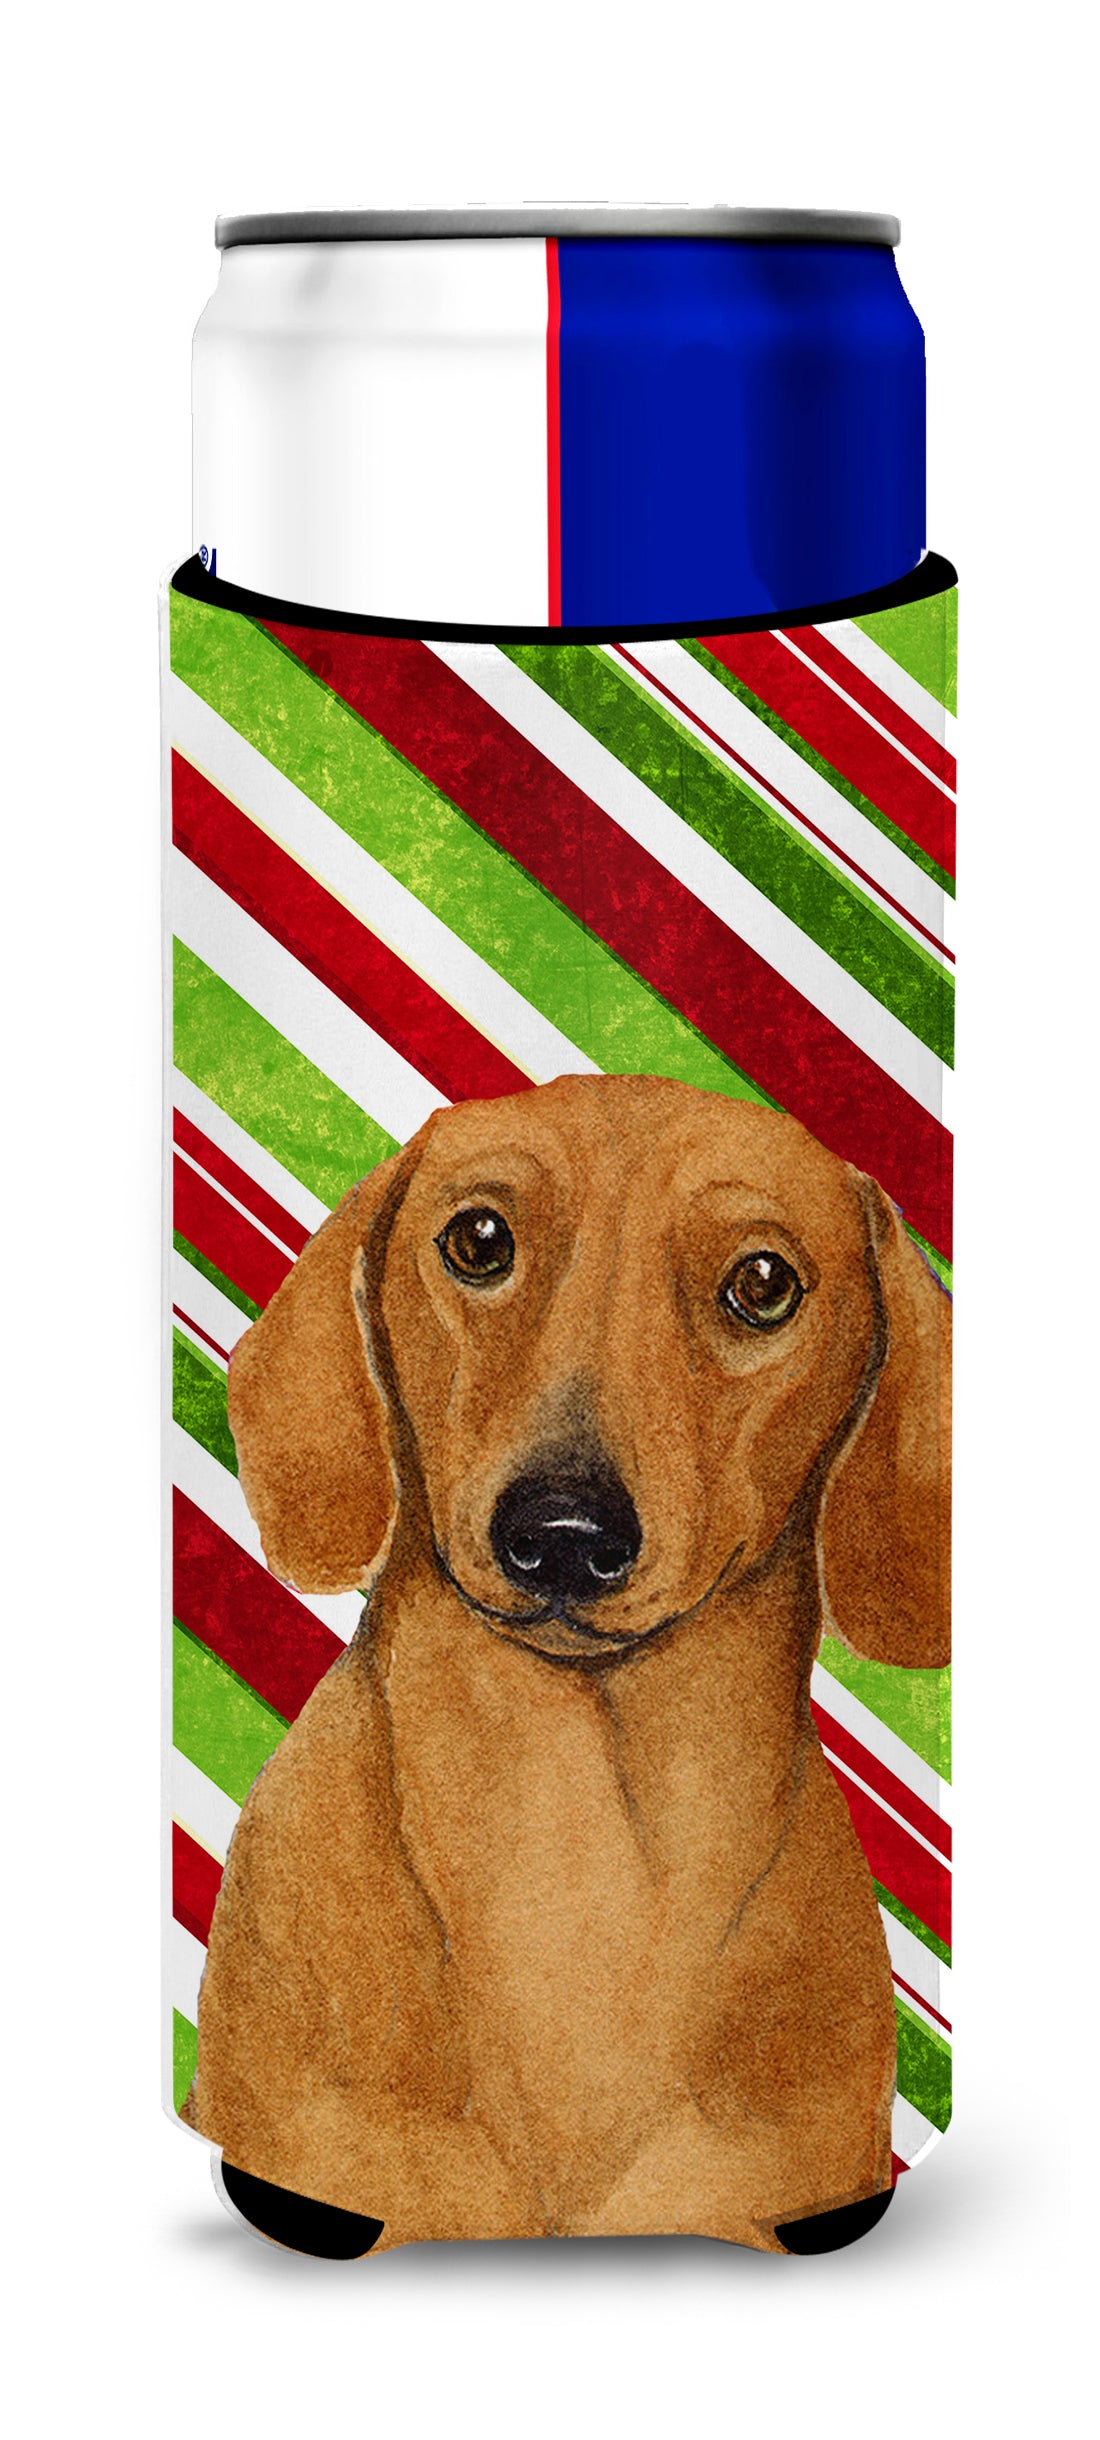 Dachshund Candy Cane Holiday Christmas Ultra Beverage Insulators for slim cans LH9222MUK.